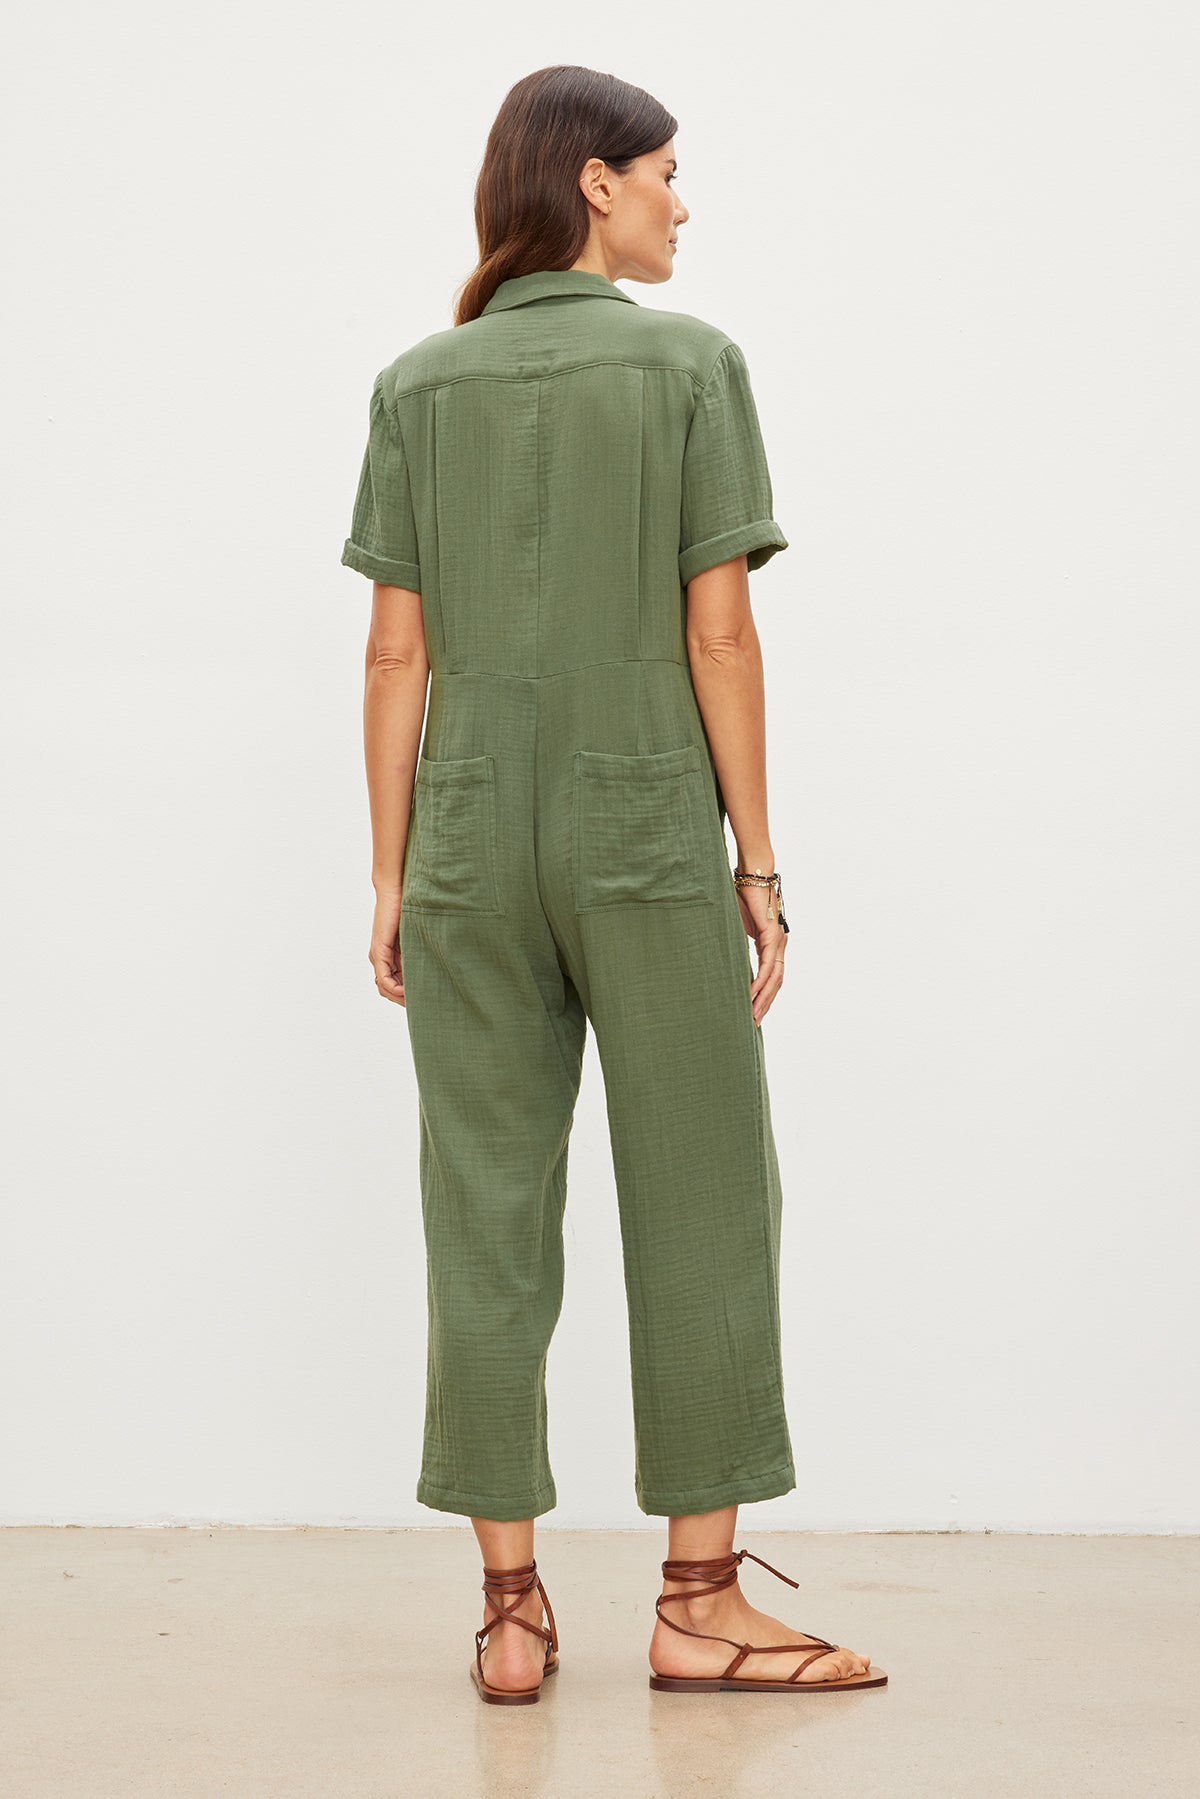 The back view of a relaxed woman wearing a green ELIA COTTON GAUZE JUMPSUIT with utilitarian detailing by Velvet by Graham & Spencer.-35955704103105